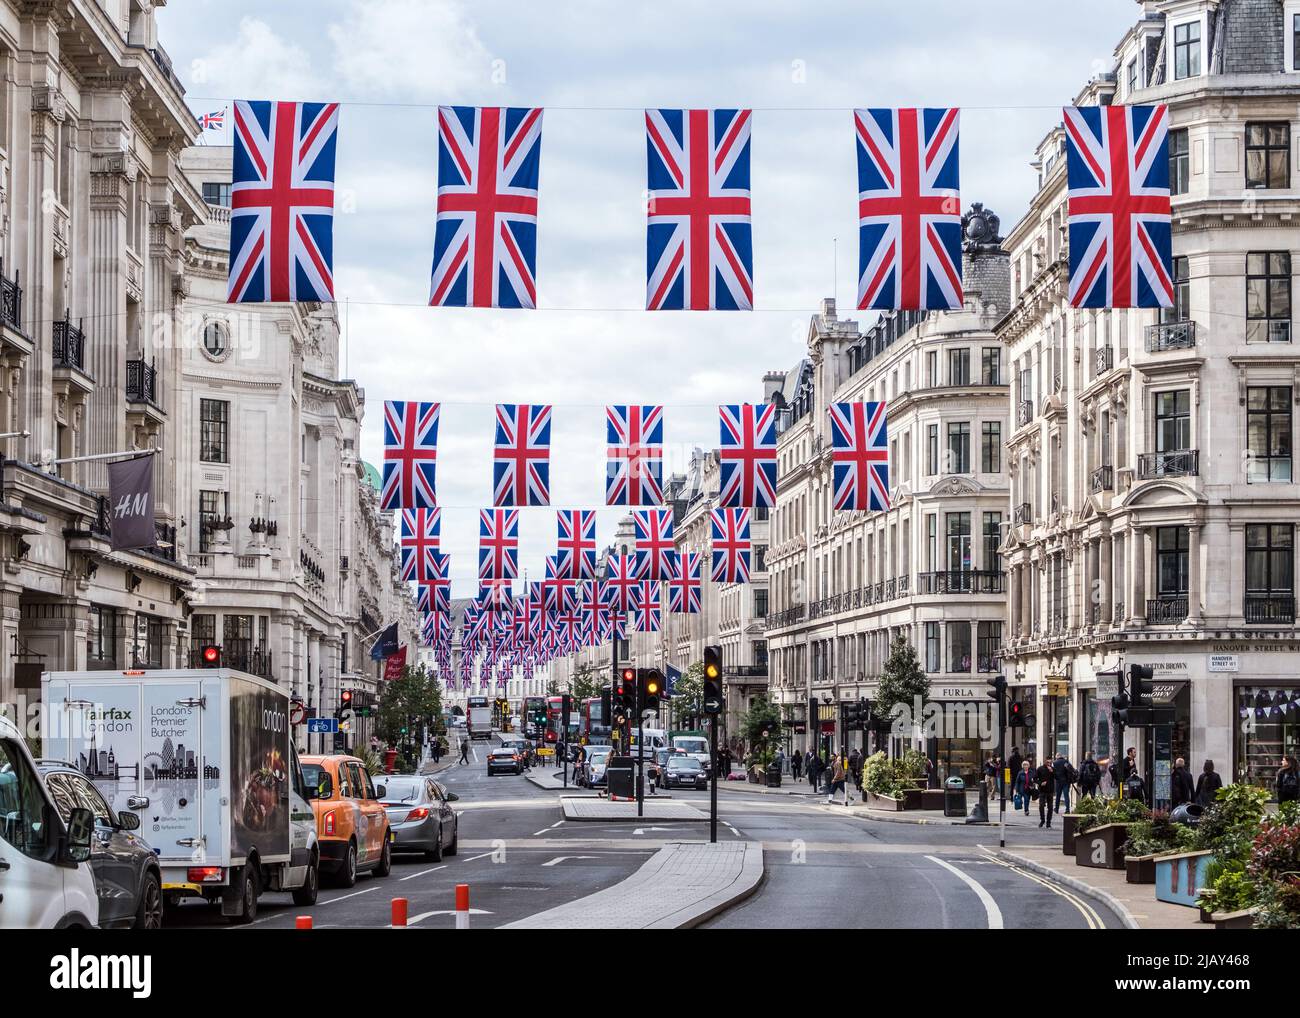 Union Jack flags hang in Regent street, London for the Queen's Platinum Jubilee 2022. Stock Photo